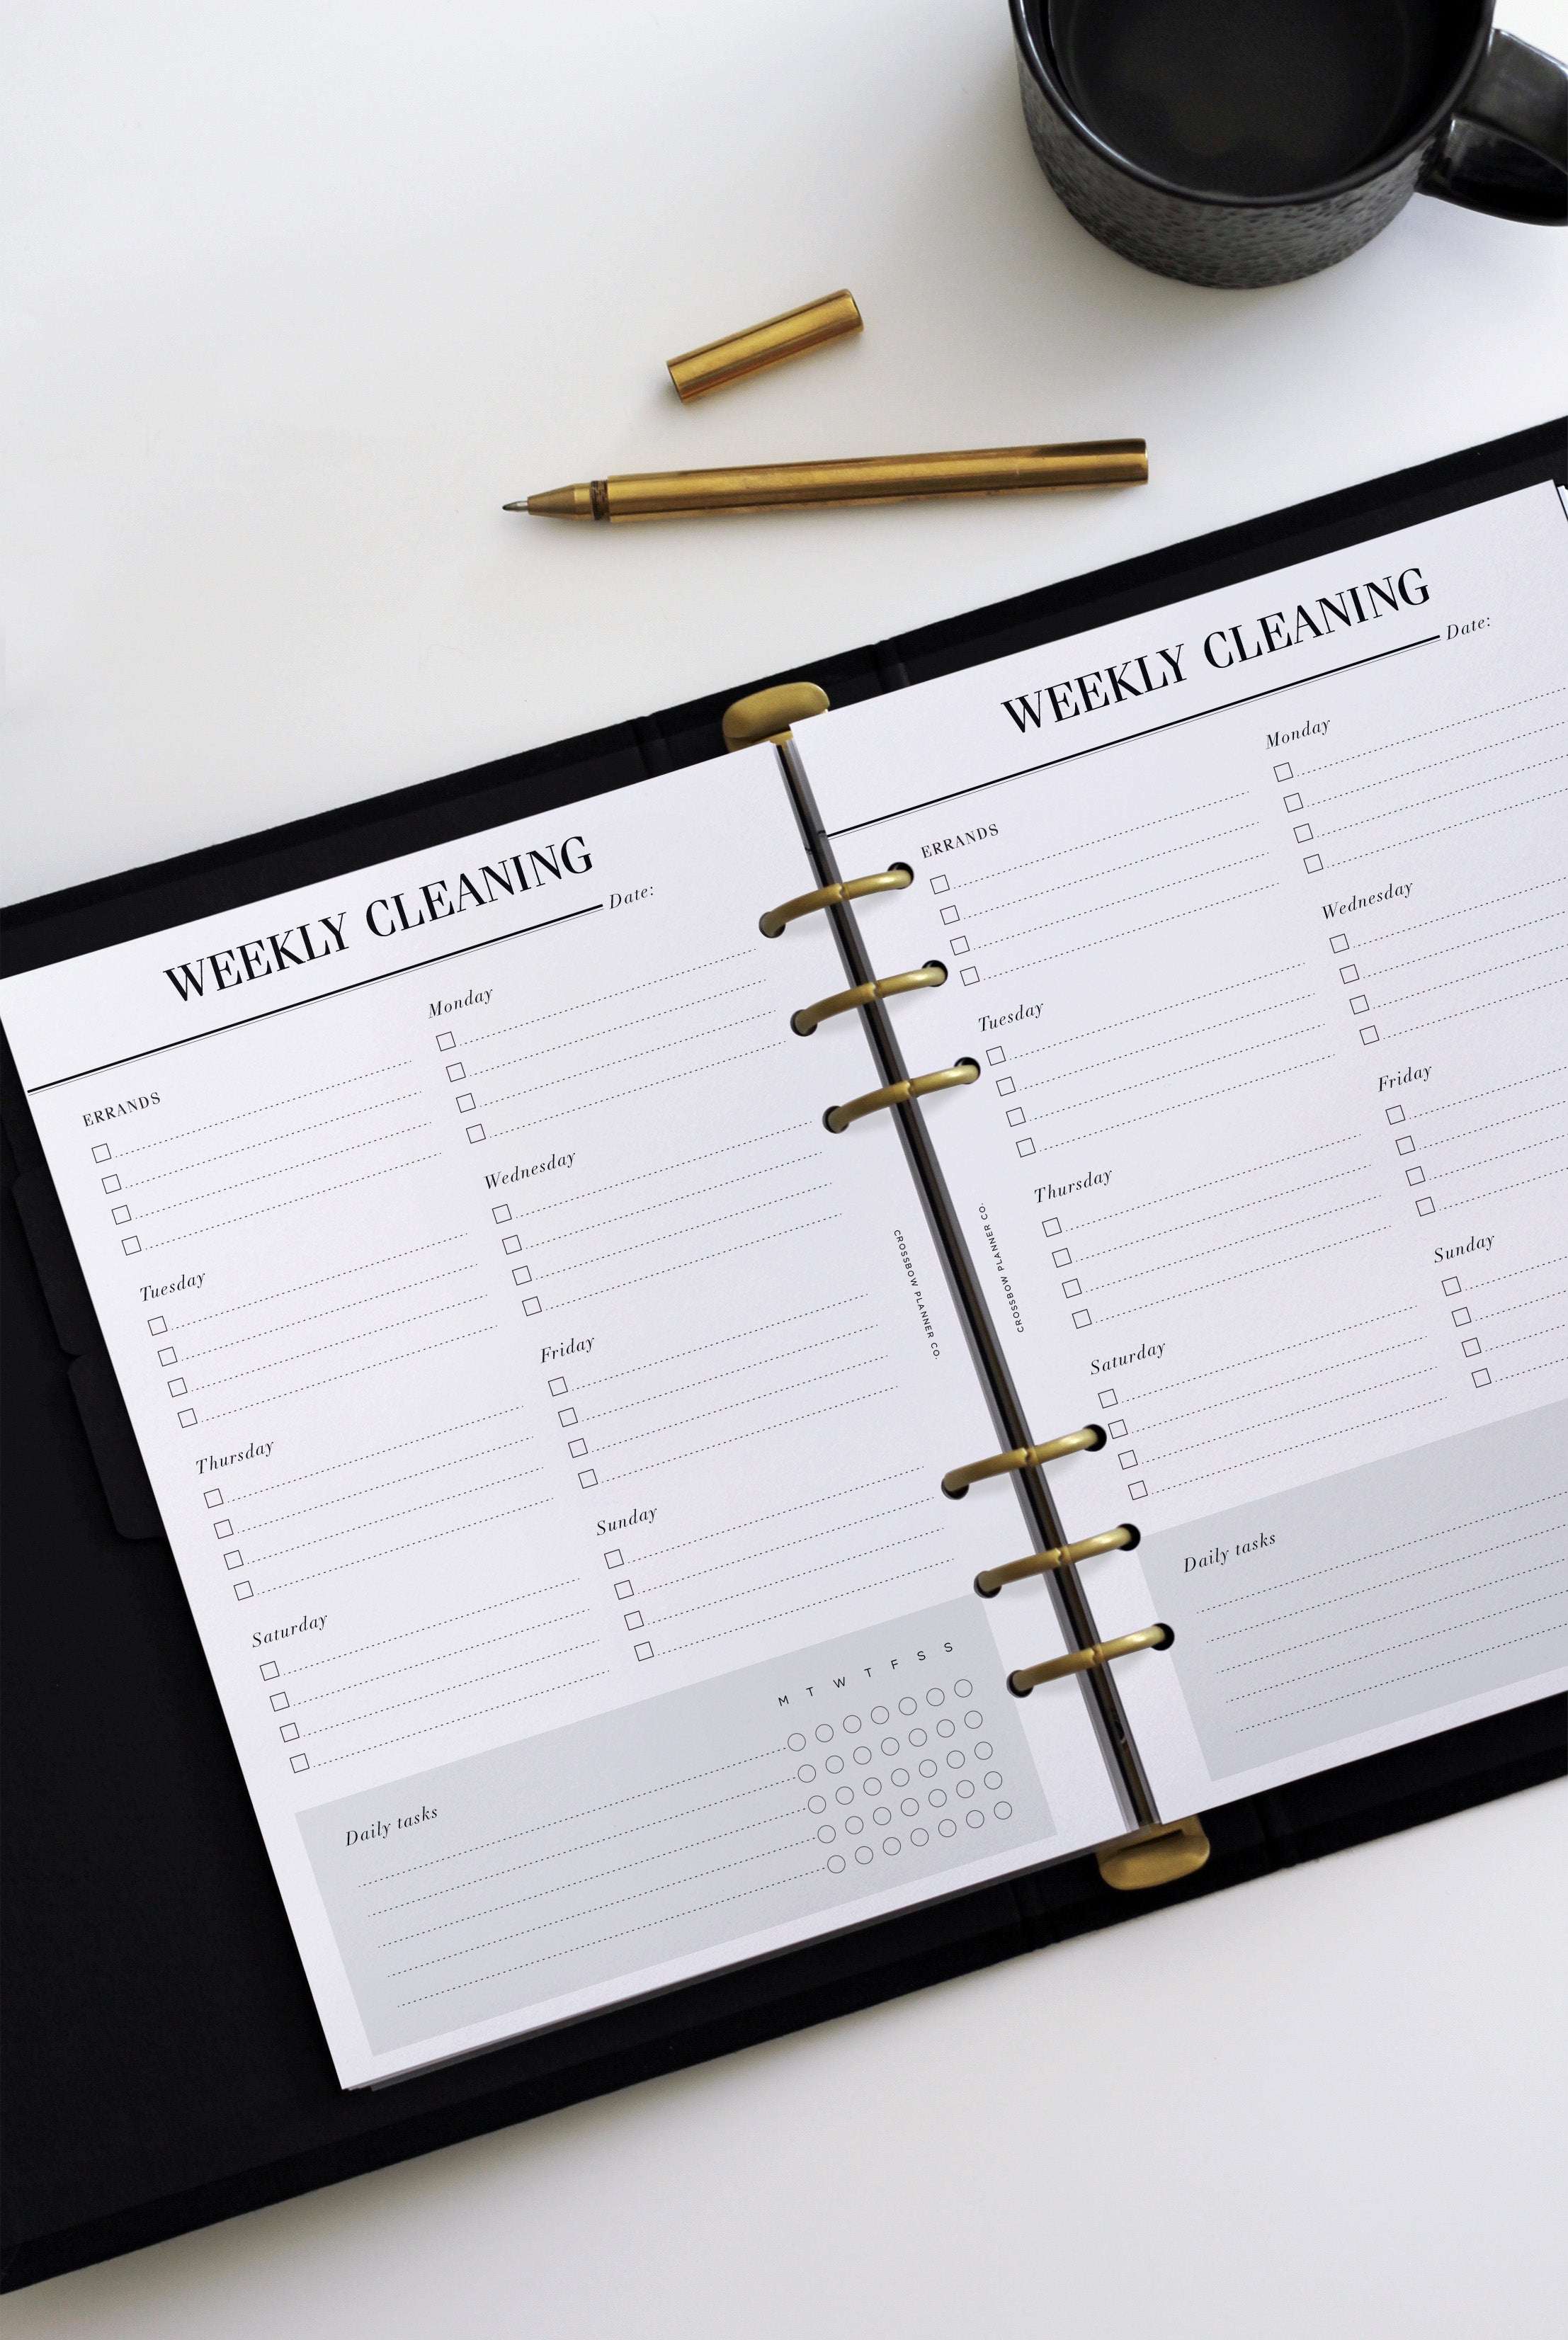 weekly cleaning checklist